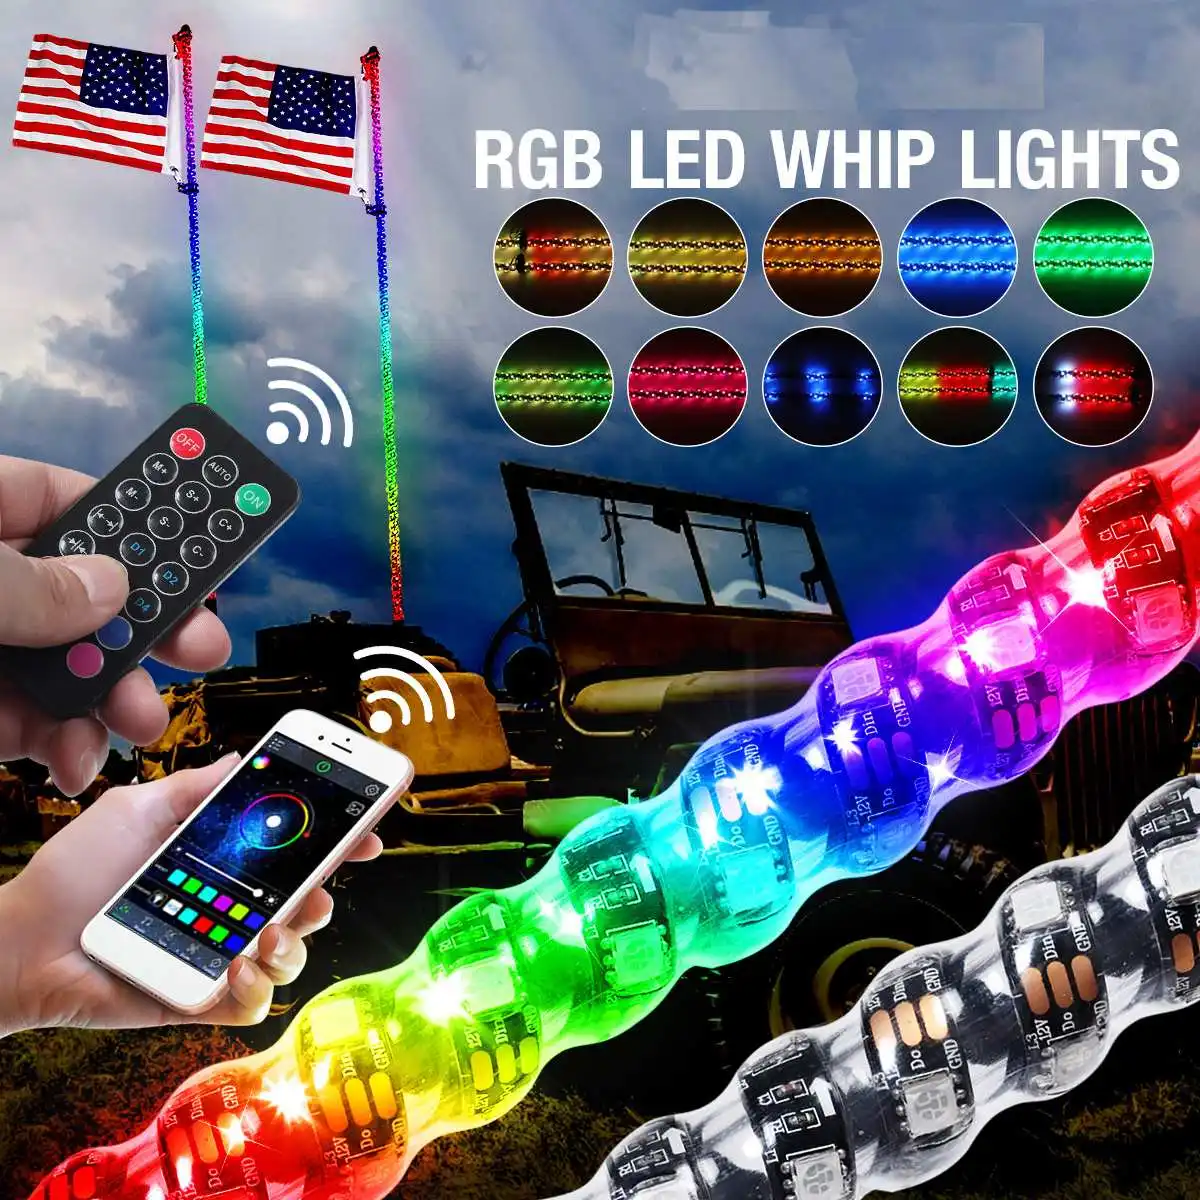 

3/4/5FT RGB Waterproof Bendable Wireless Remote Control Super Bright LED Flagpole Lamp Light Max 133W DC12V+America Flag